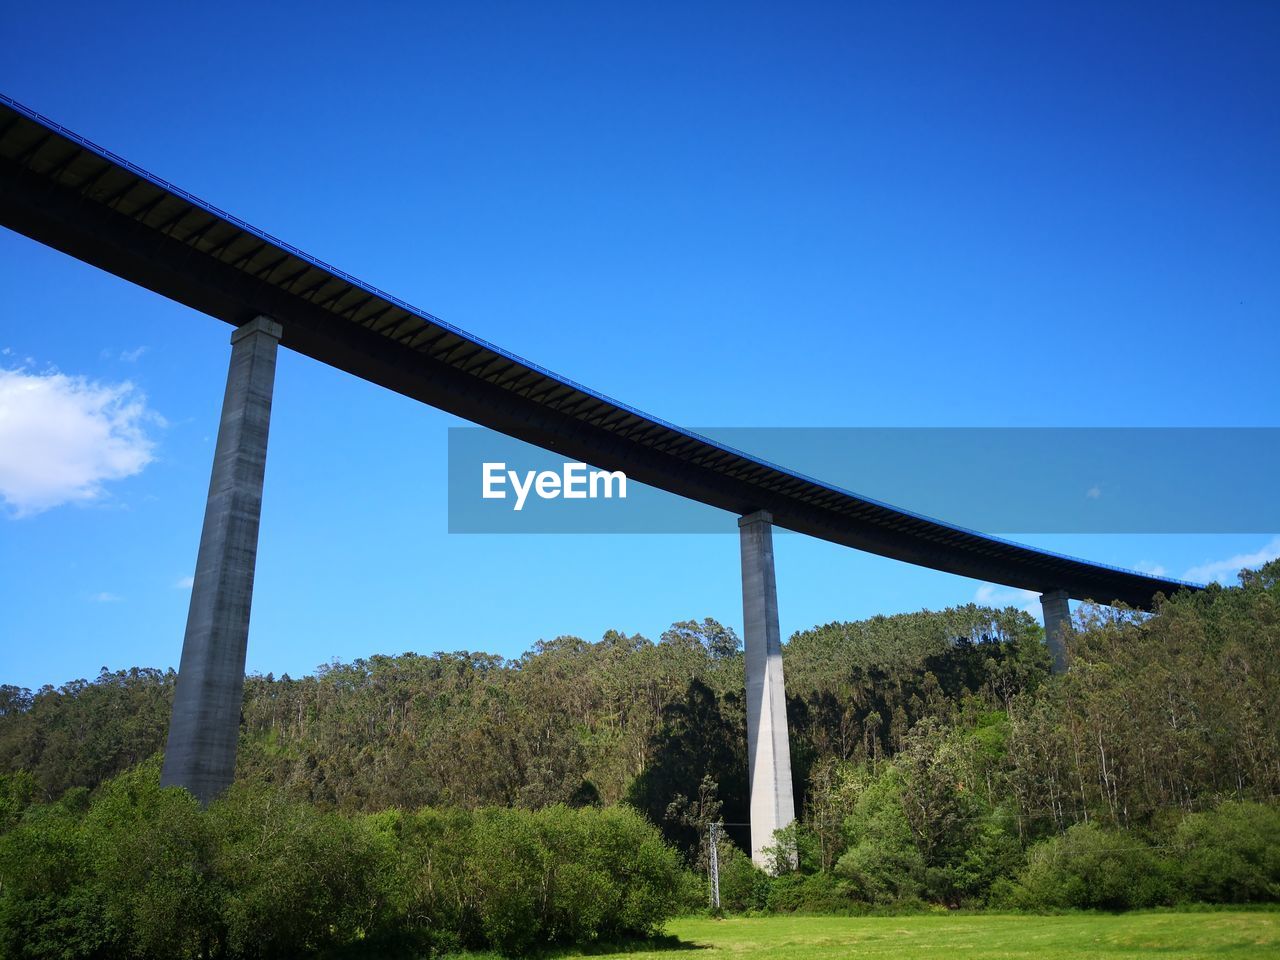 LOW ANGLE VIEW OF BRIDGE AGAINST SKY